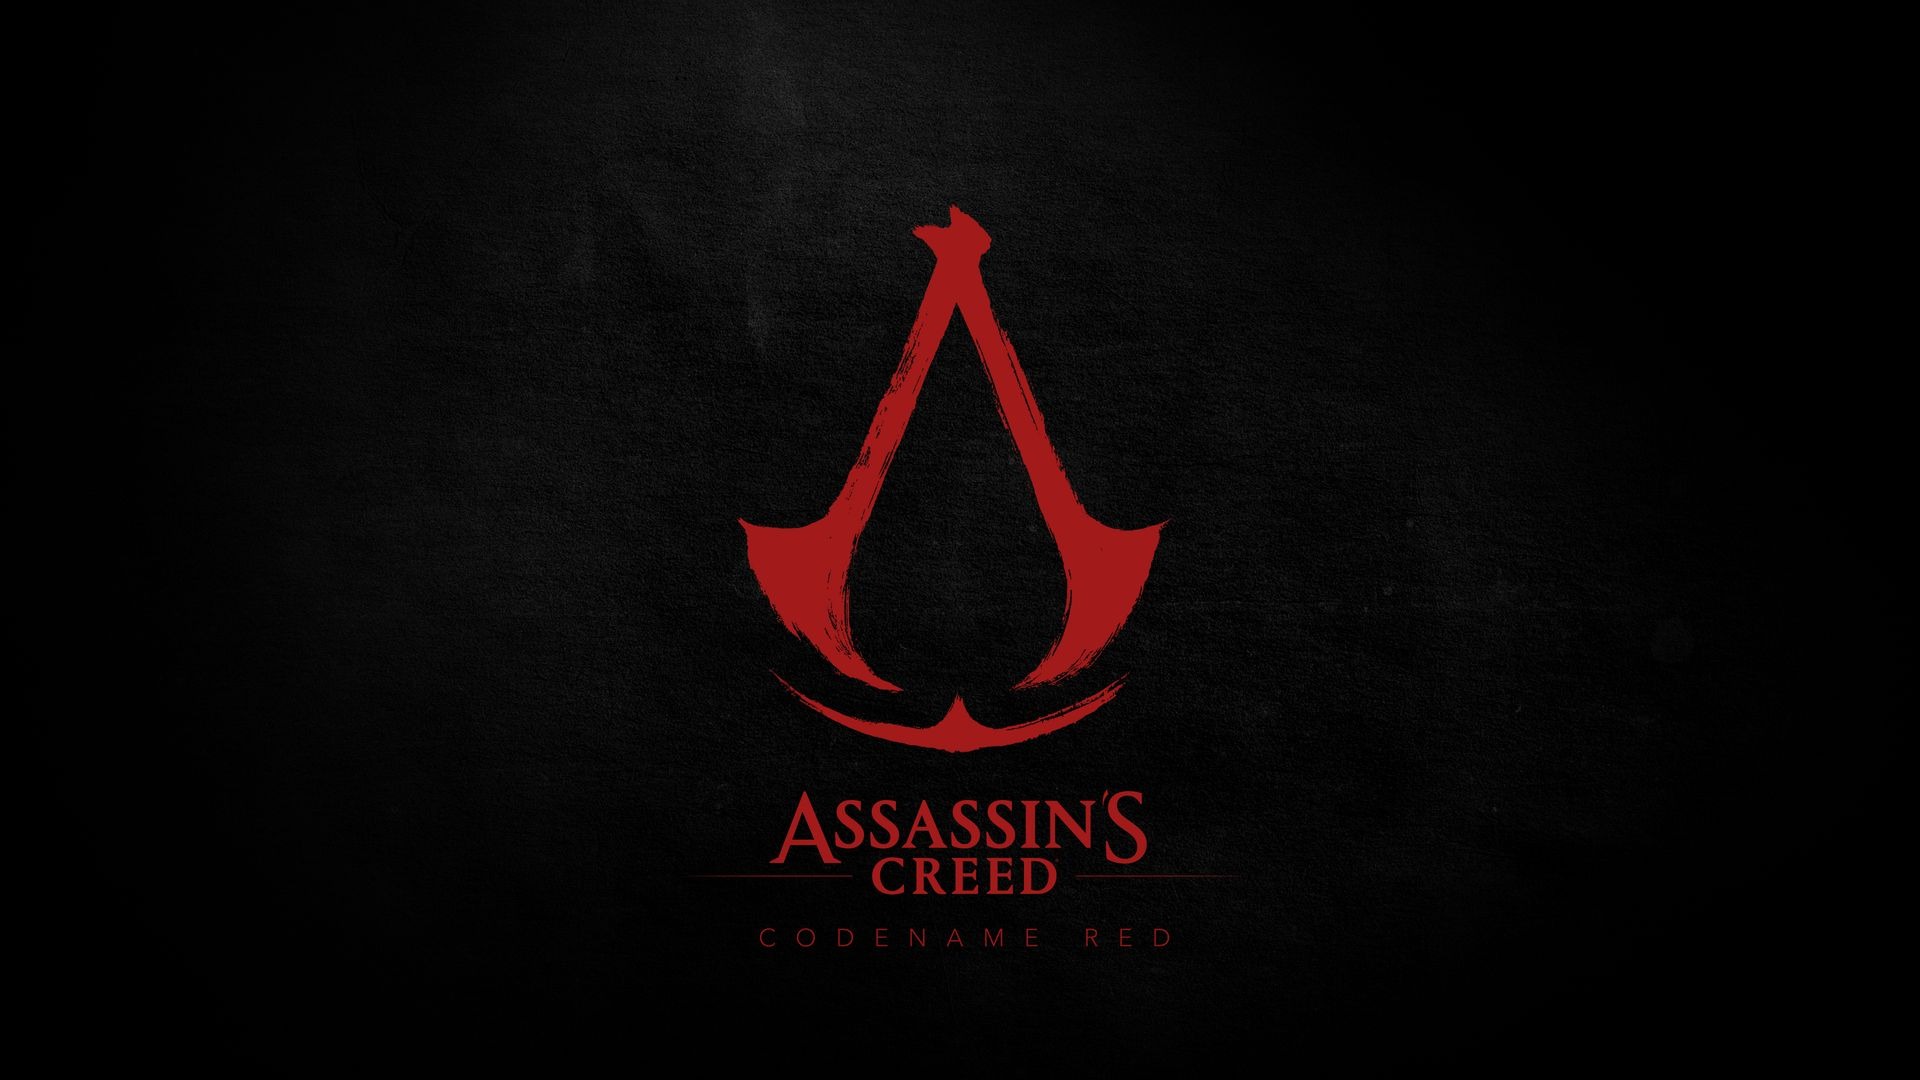 Красивое имя для ассасина. Assassin's Creed Codename Red. Assassin's Creed: Codename Hexe. Assassin's Creed: Codename Red (2024). Assassins creed red дата